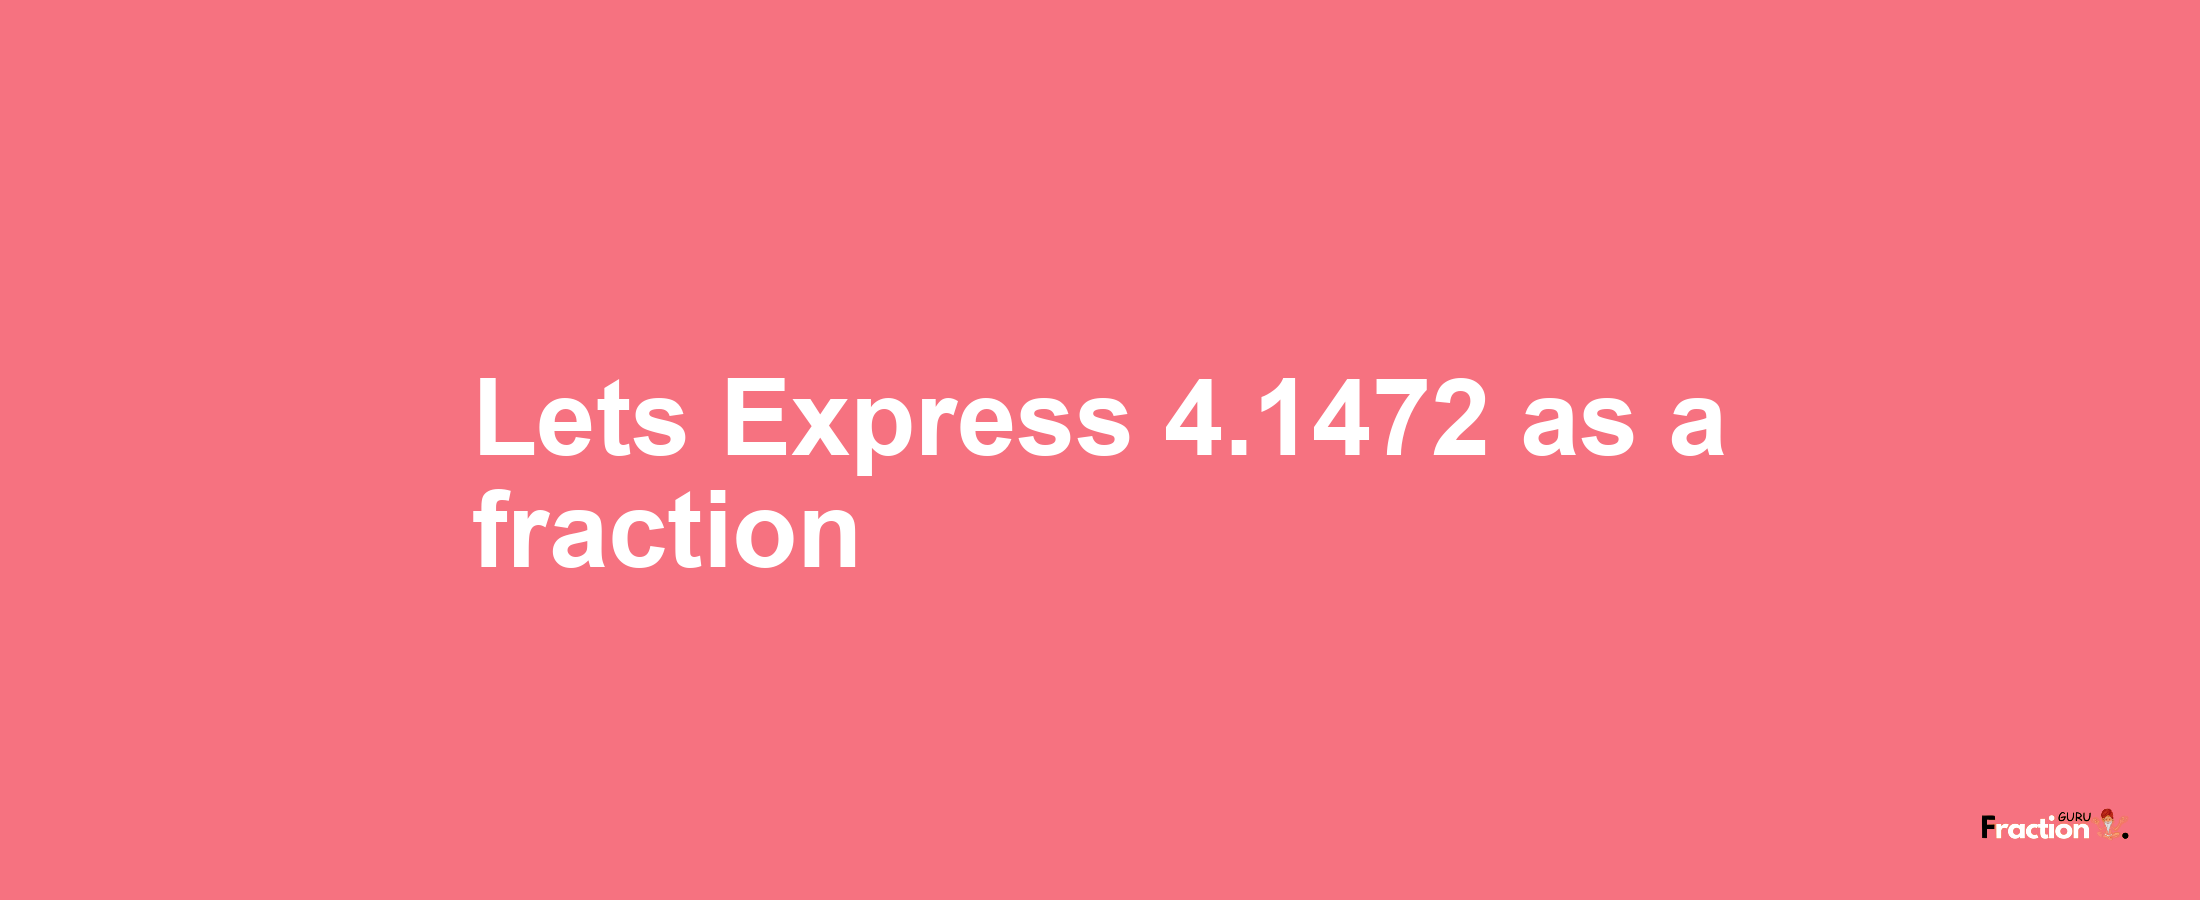 Lets Express 4.1472 as afraction